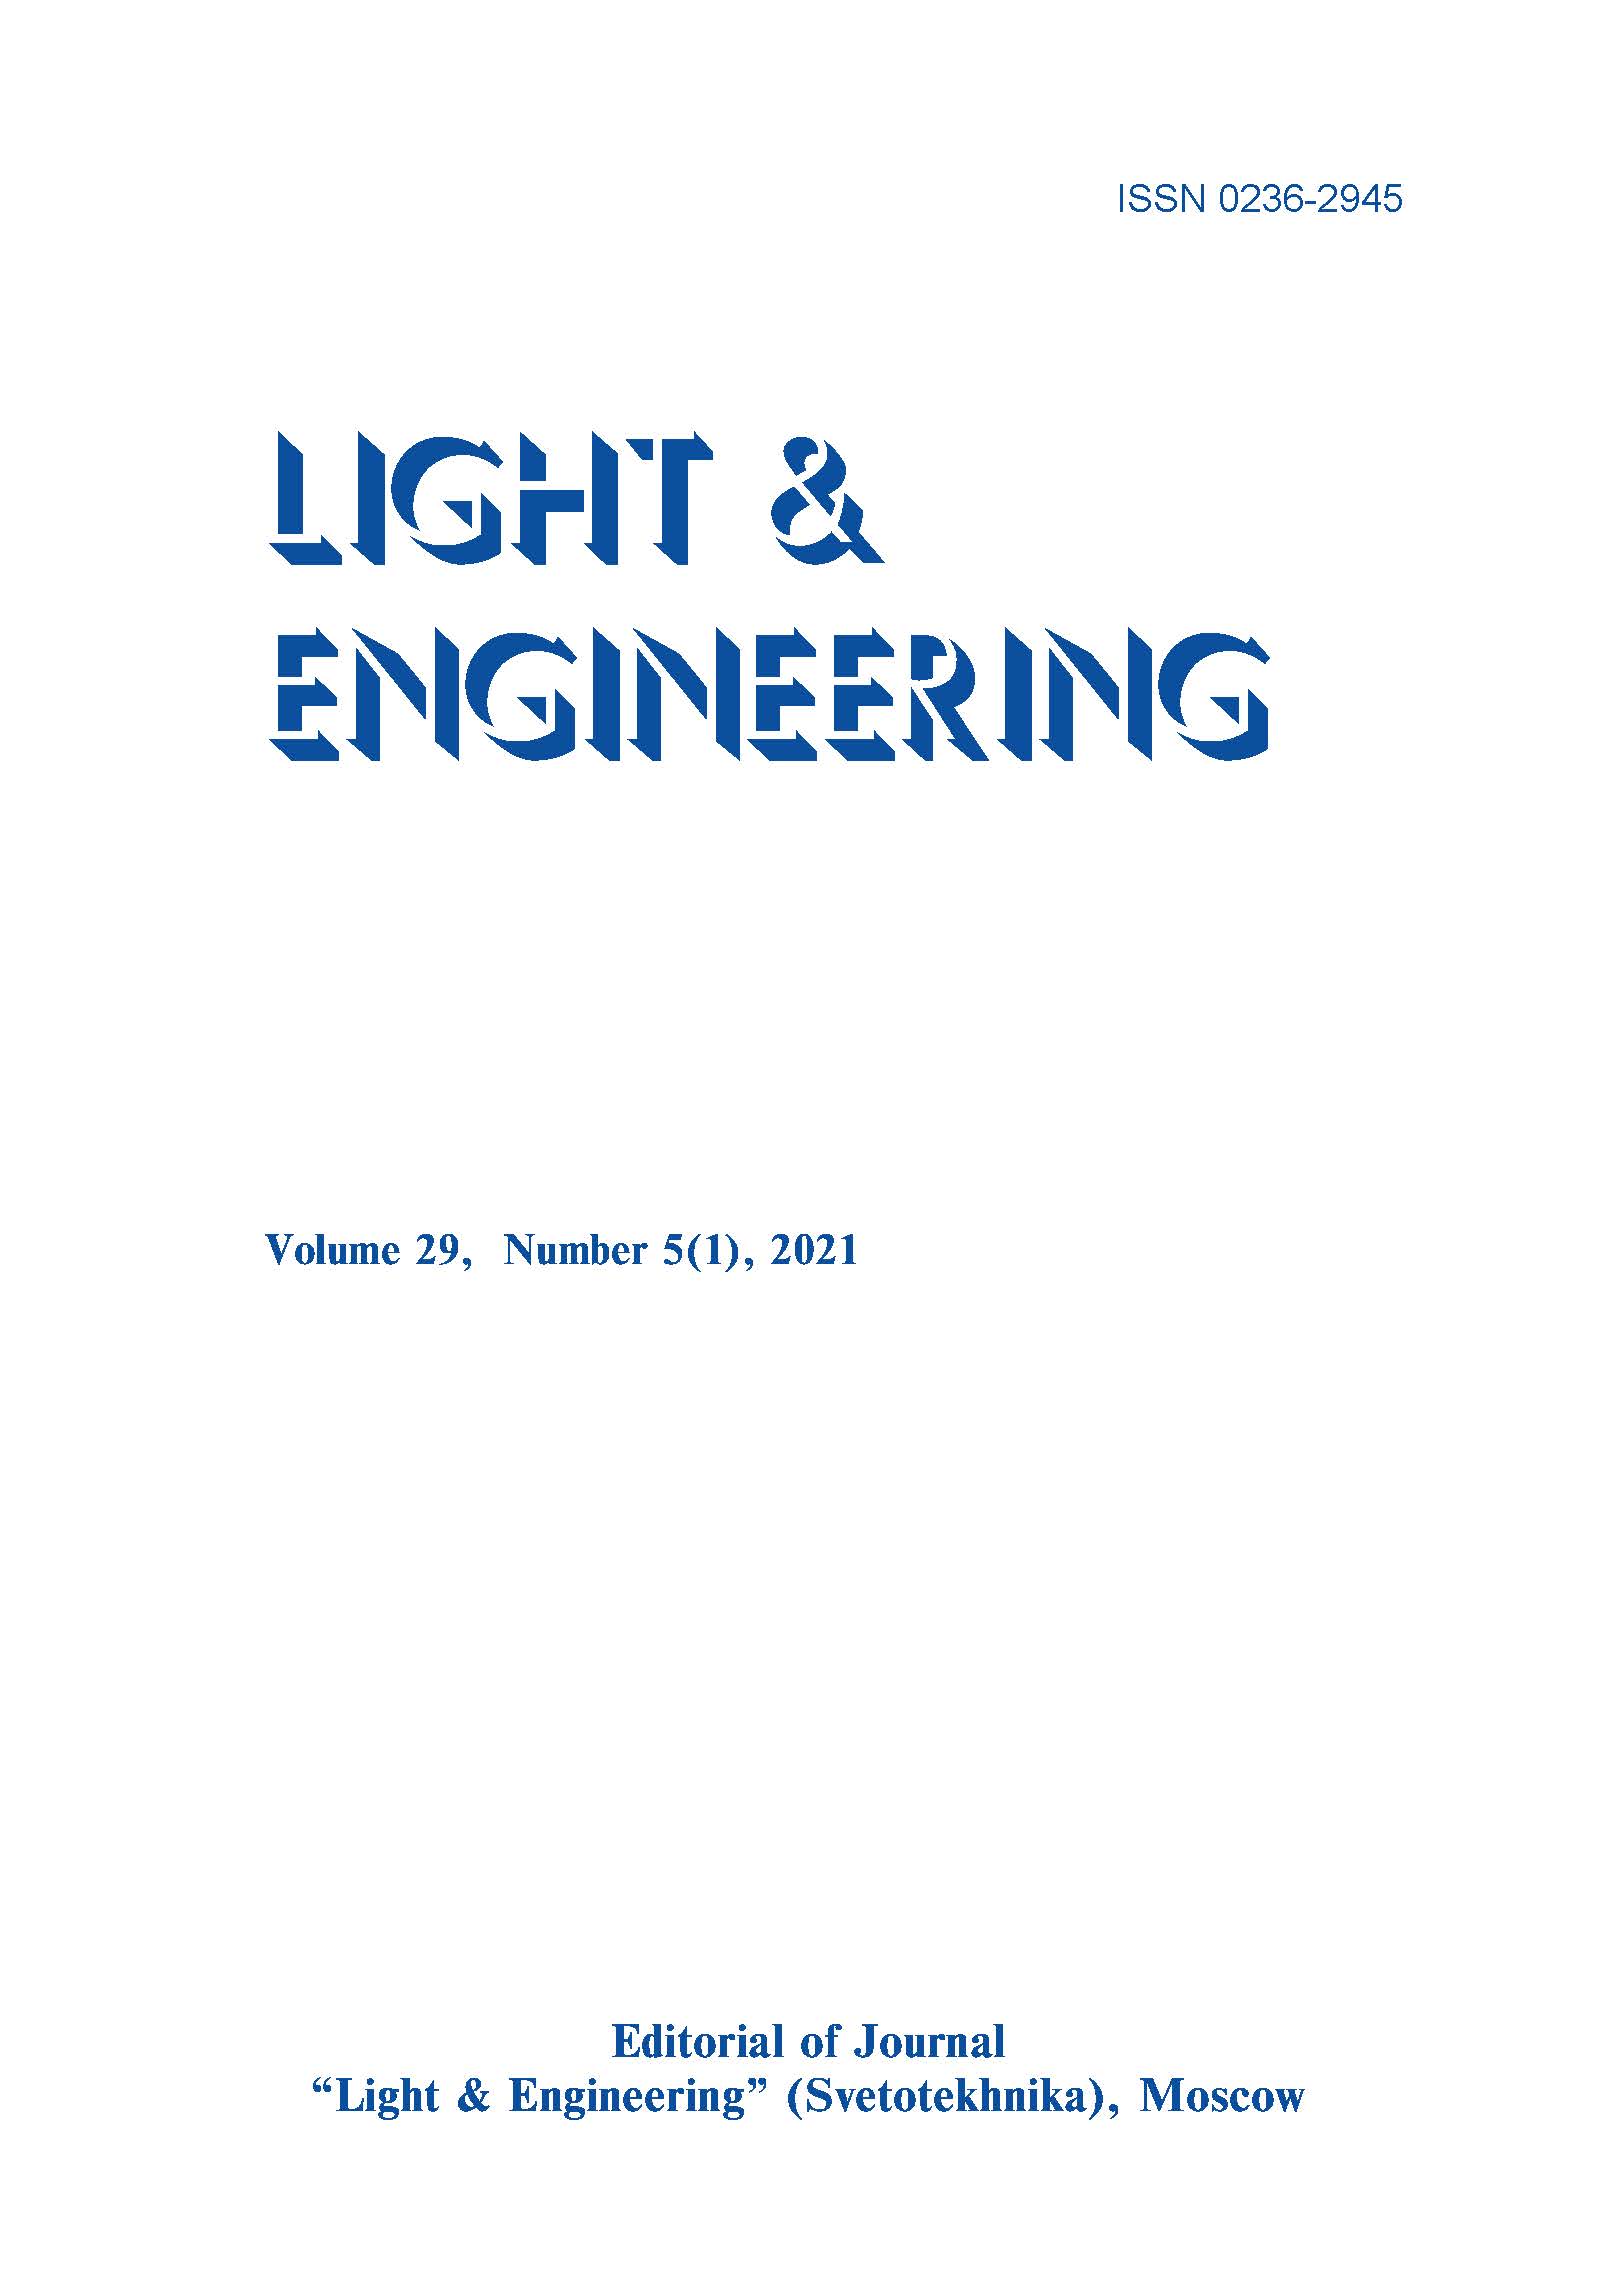 Autonomous Active Solar Energy Systems for Heat Supply in Housing and Communal Services L&E, Vol. 29, No. 5 (1), 2021